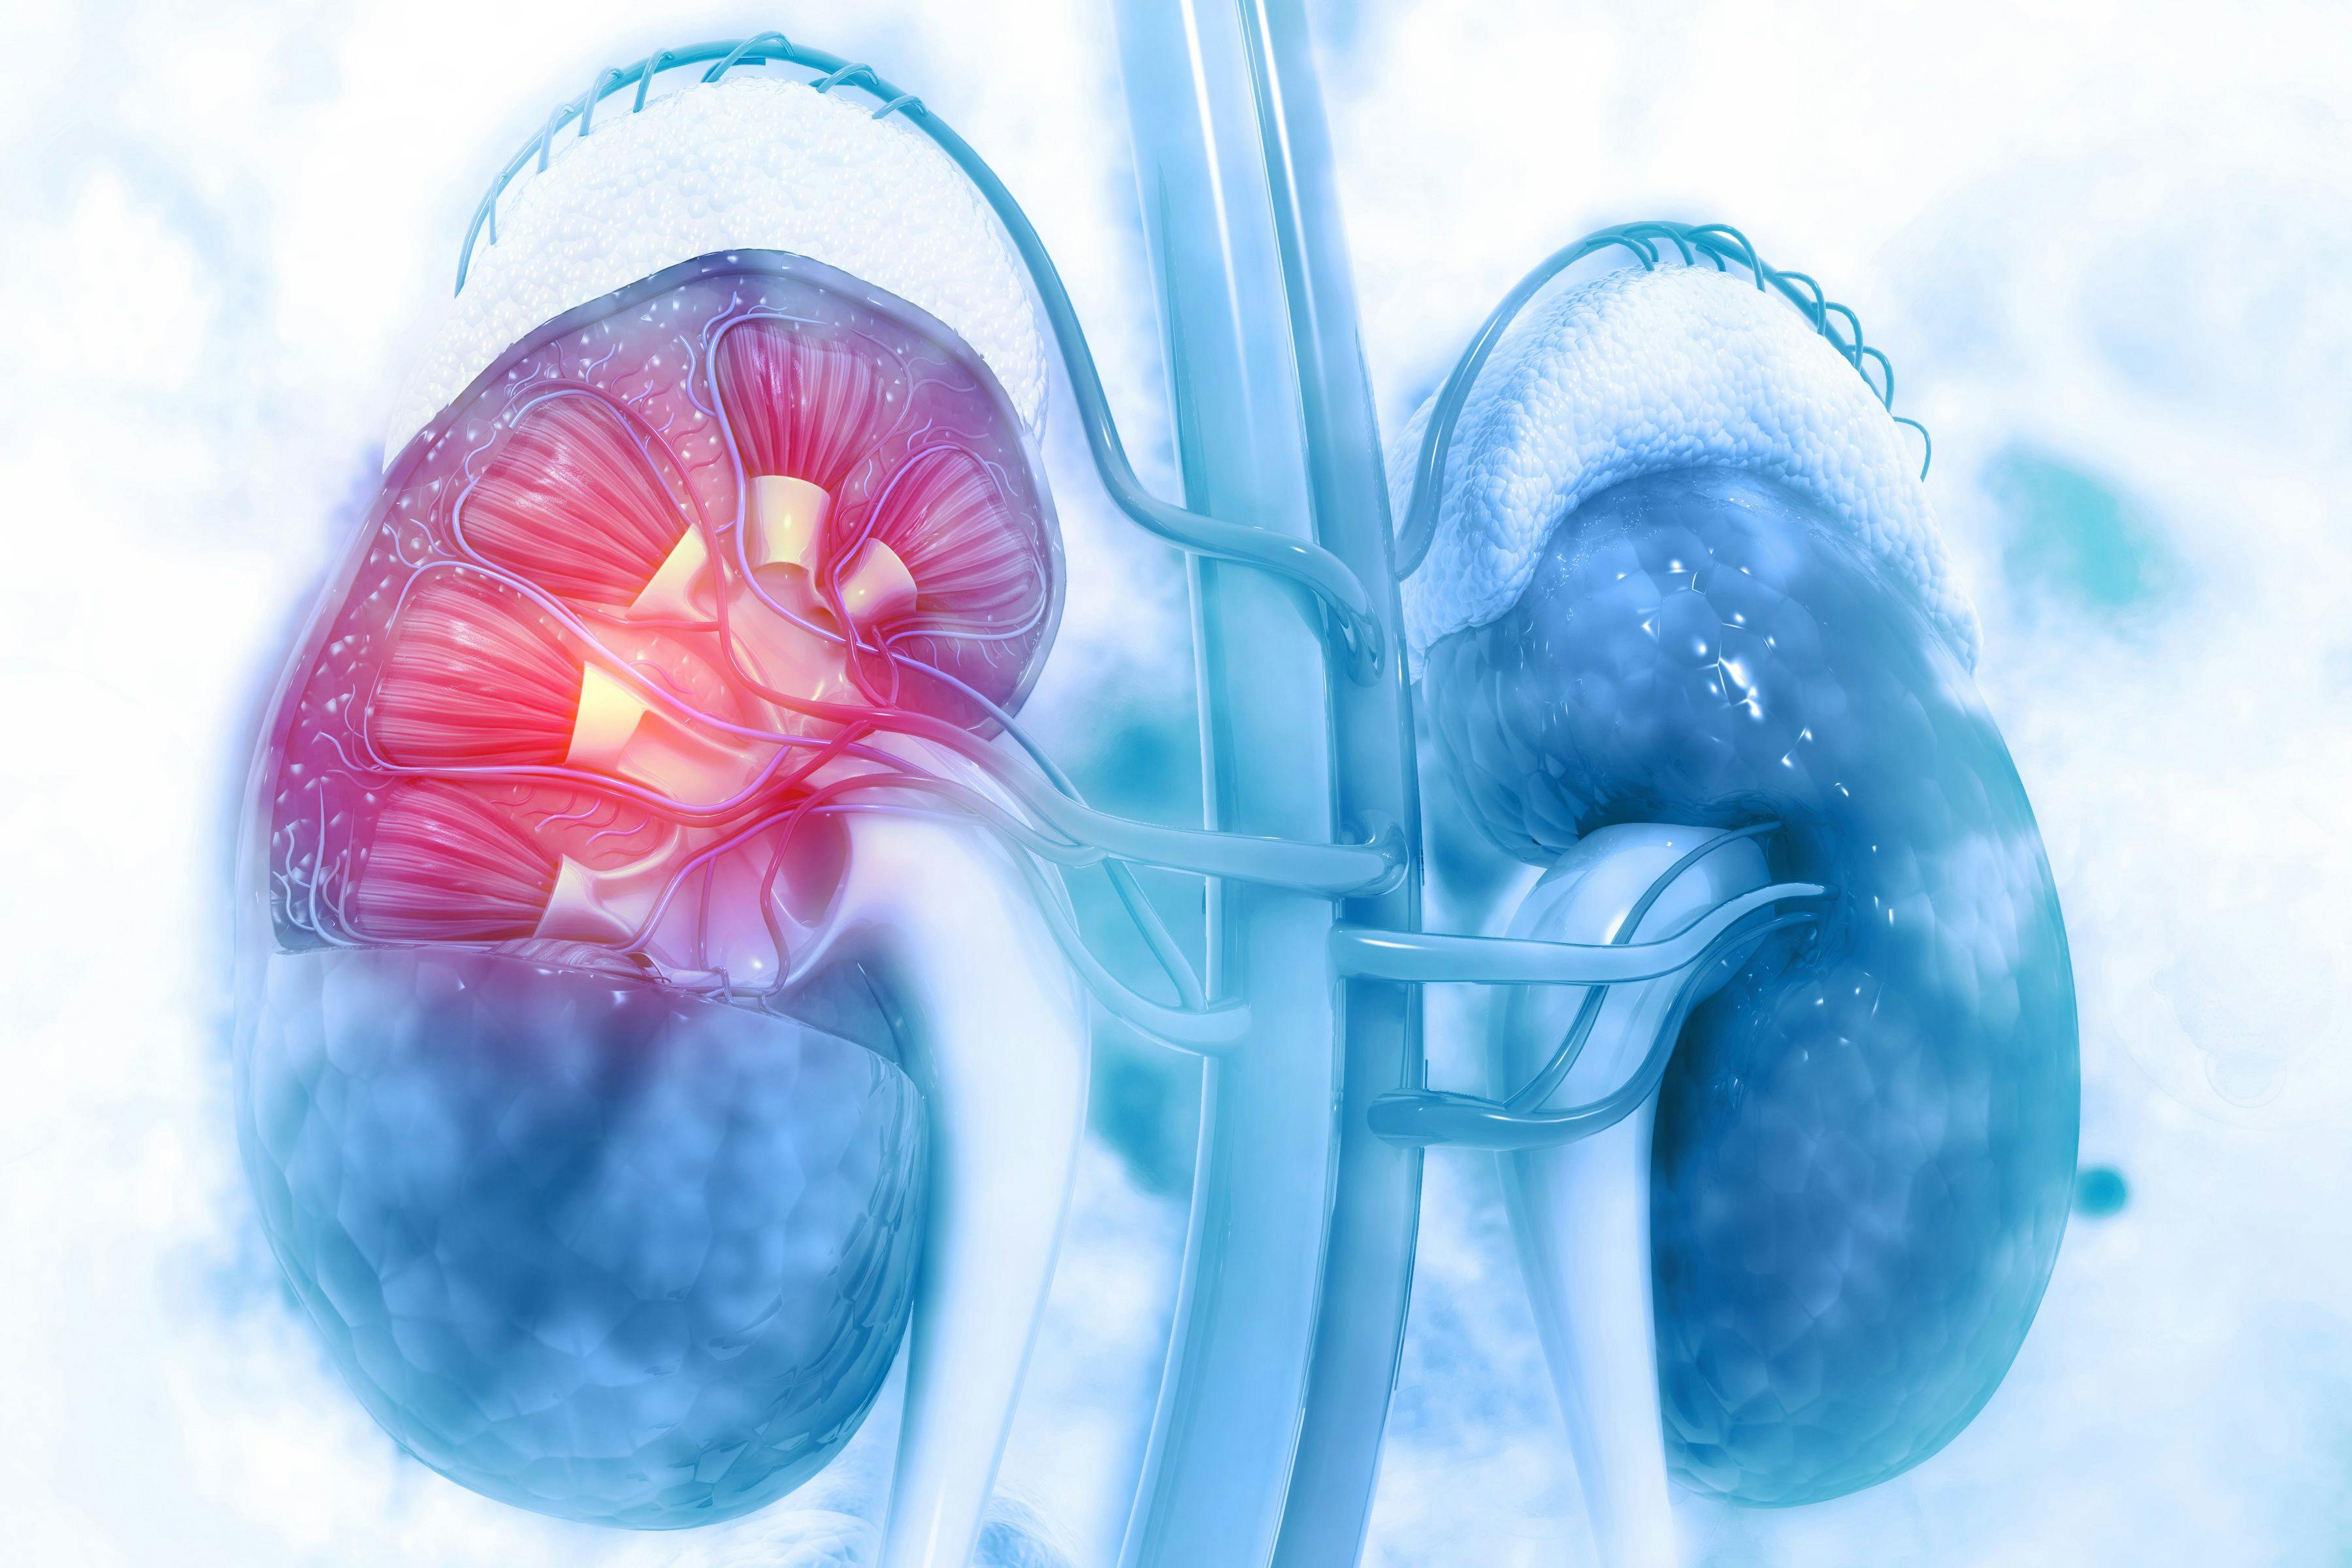 Cytoreductive Nephrectomy, Immunotherapy-Based Systemic Therapy Induce Benefit in mRCC